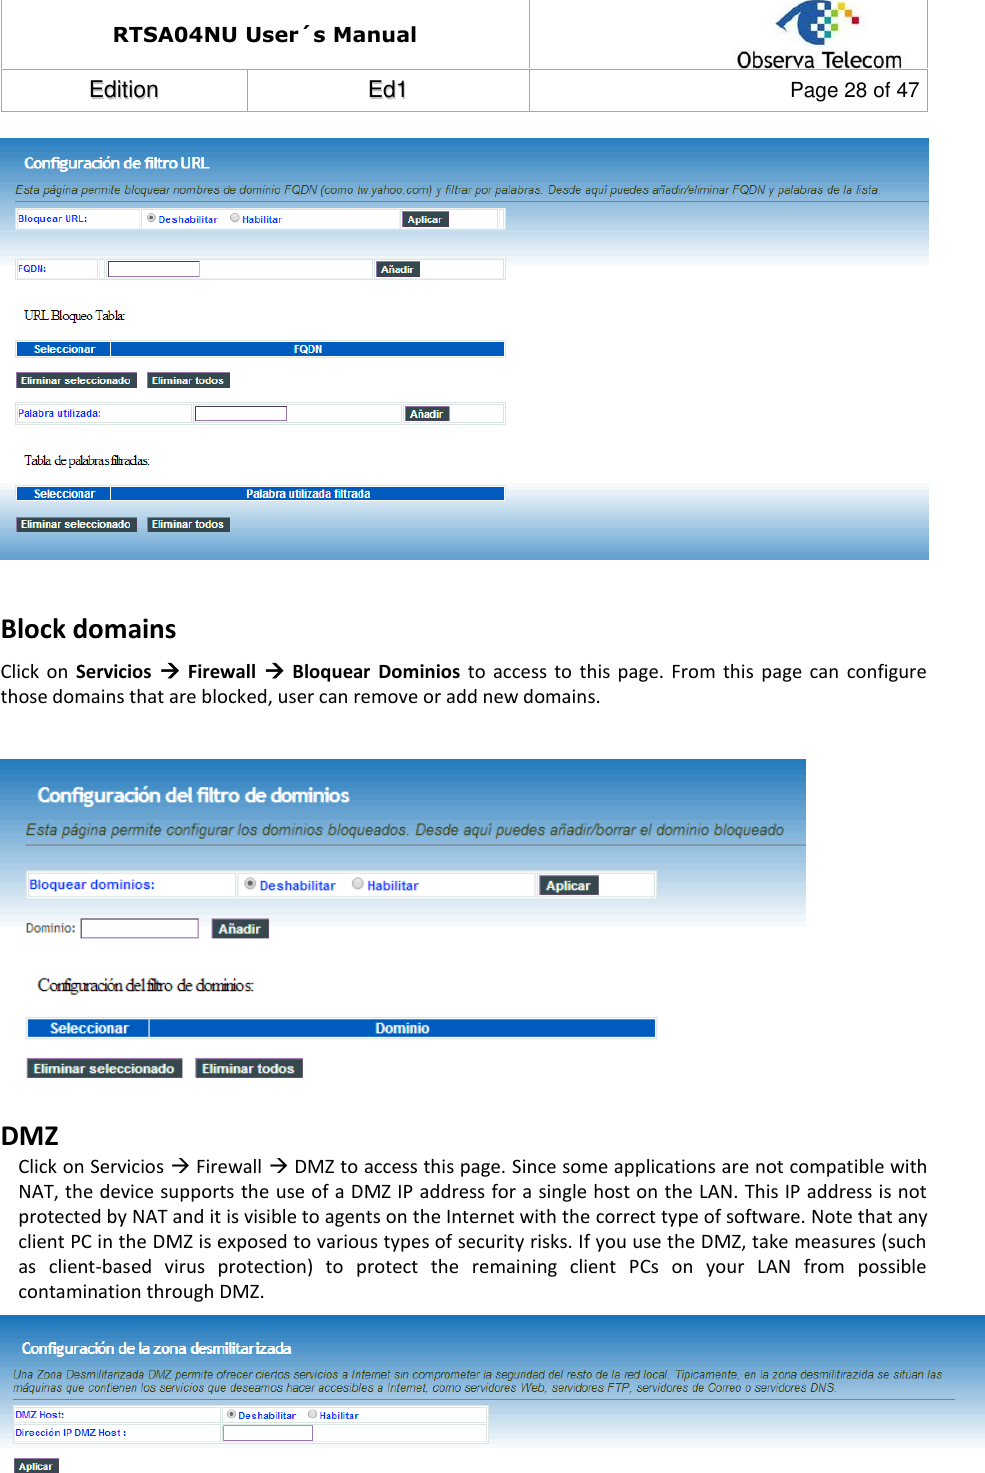 RTSA04NU User´s Manual  EEddiittiioonn  EEdd11  Page 28 of 47    Block domains Click  on  Servicios    Firewall    Bloquear  Dominios  to  access  to  this  page.  From  this  page  can  configure those domains that are blocked, user can remove or add new domains.   DMZ Click on Servicios  Firewall  DMZ to access this page. Since some applications are not compatible with NAT, the device supports the use of a DMZ IP address for a single host on the LAN. This IP address is not protected by NAT and it is visible to agents on the Internet with the correct type of software. Note that any client PC in the DMZ is exposed to various types of security risks. If you use the DMZ, take measures (such as  client-based  virus  protection)  to  protect  the  remaining  client  PCs  on  your  LAN  from  possible contamination through DMZ.   